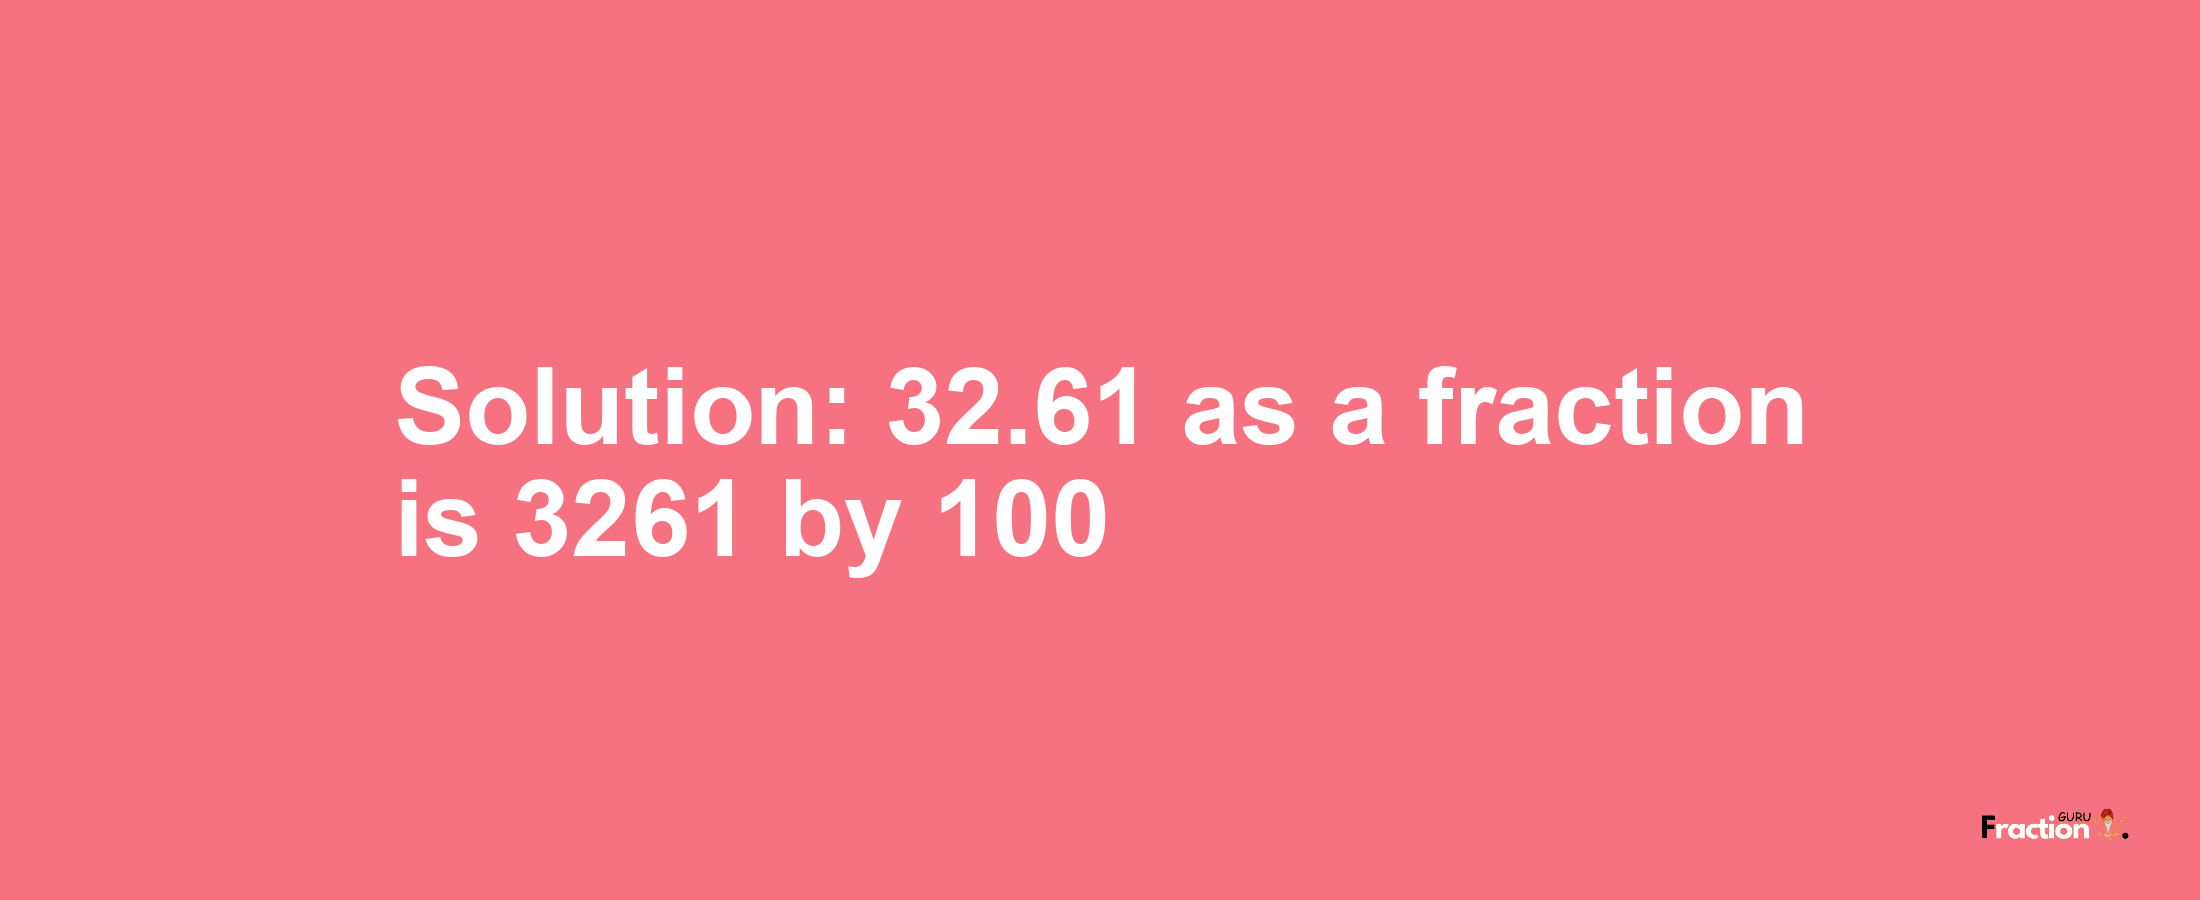 Solution:32.61 as a fraction is 3261/100